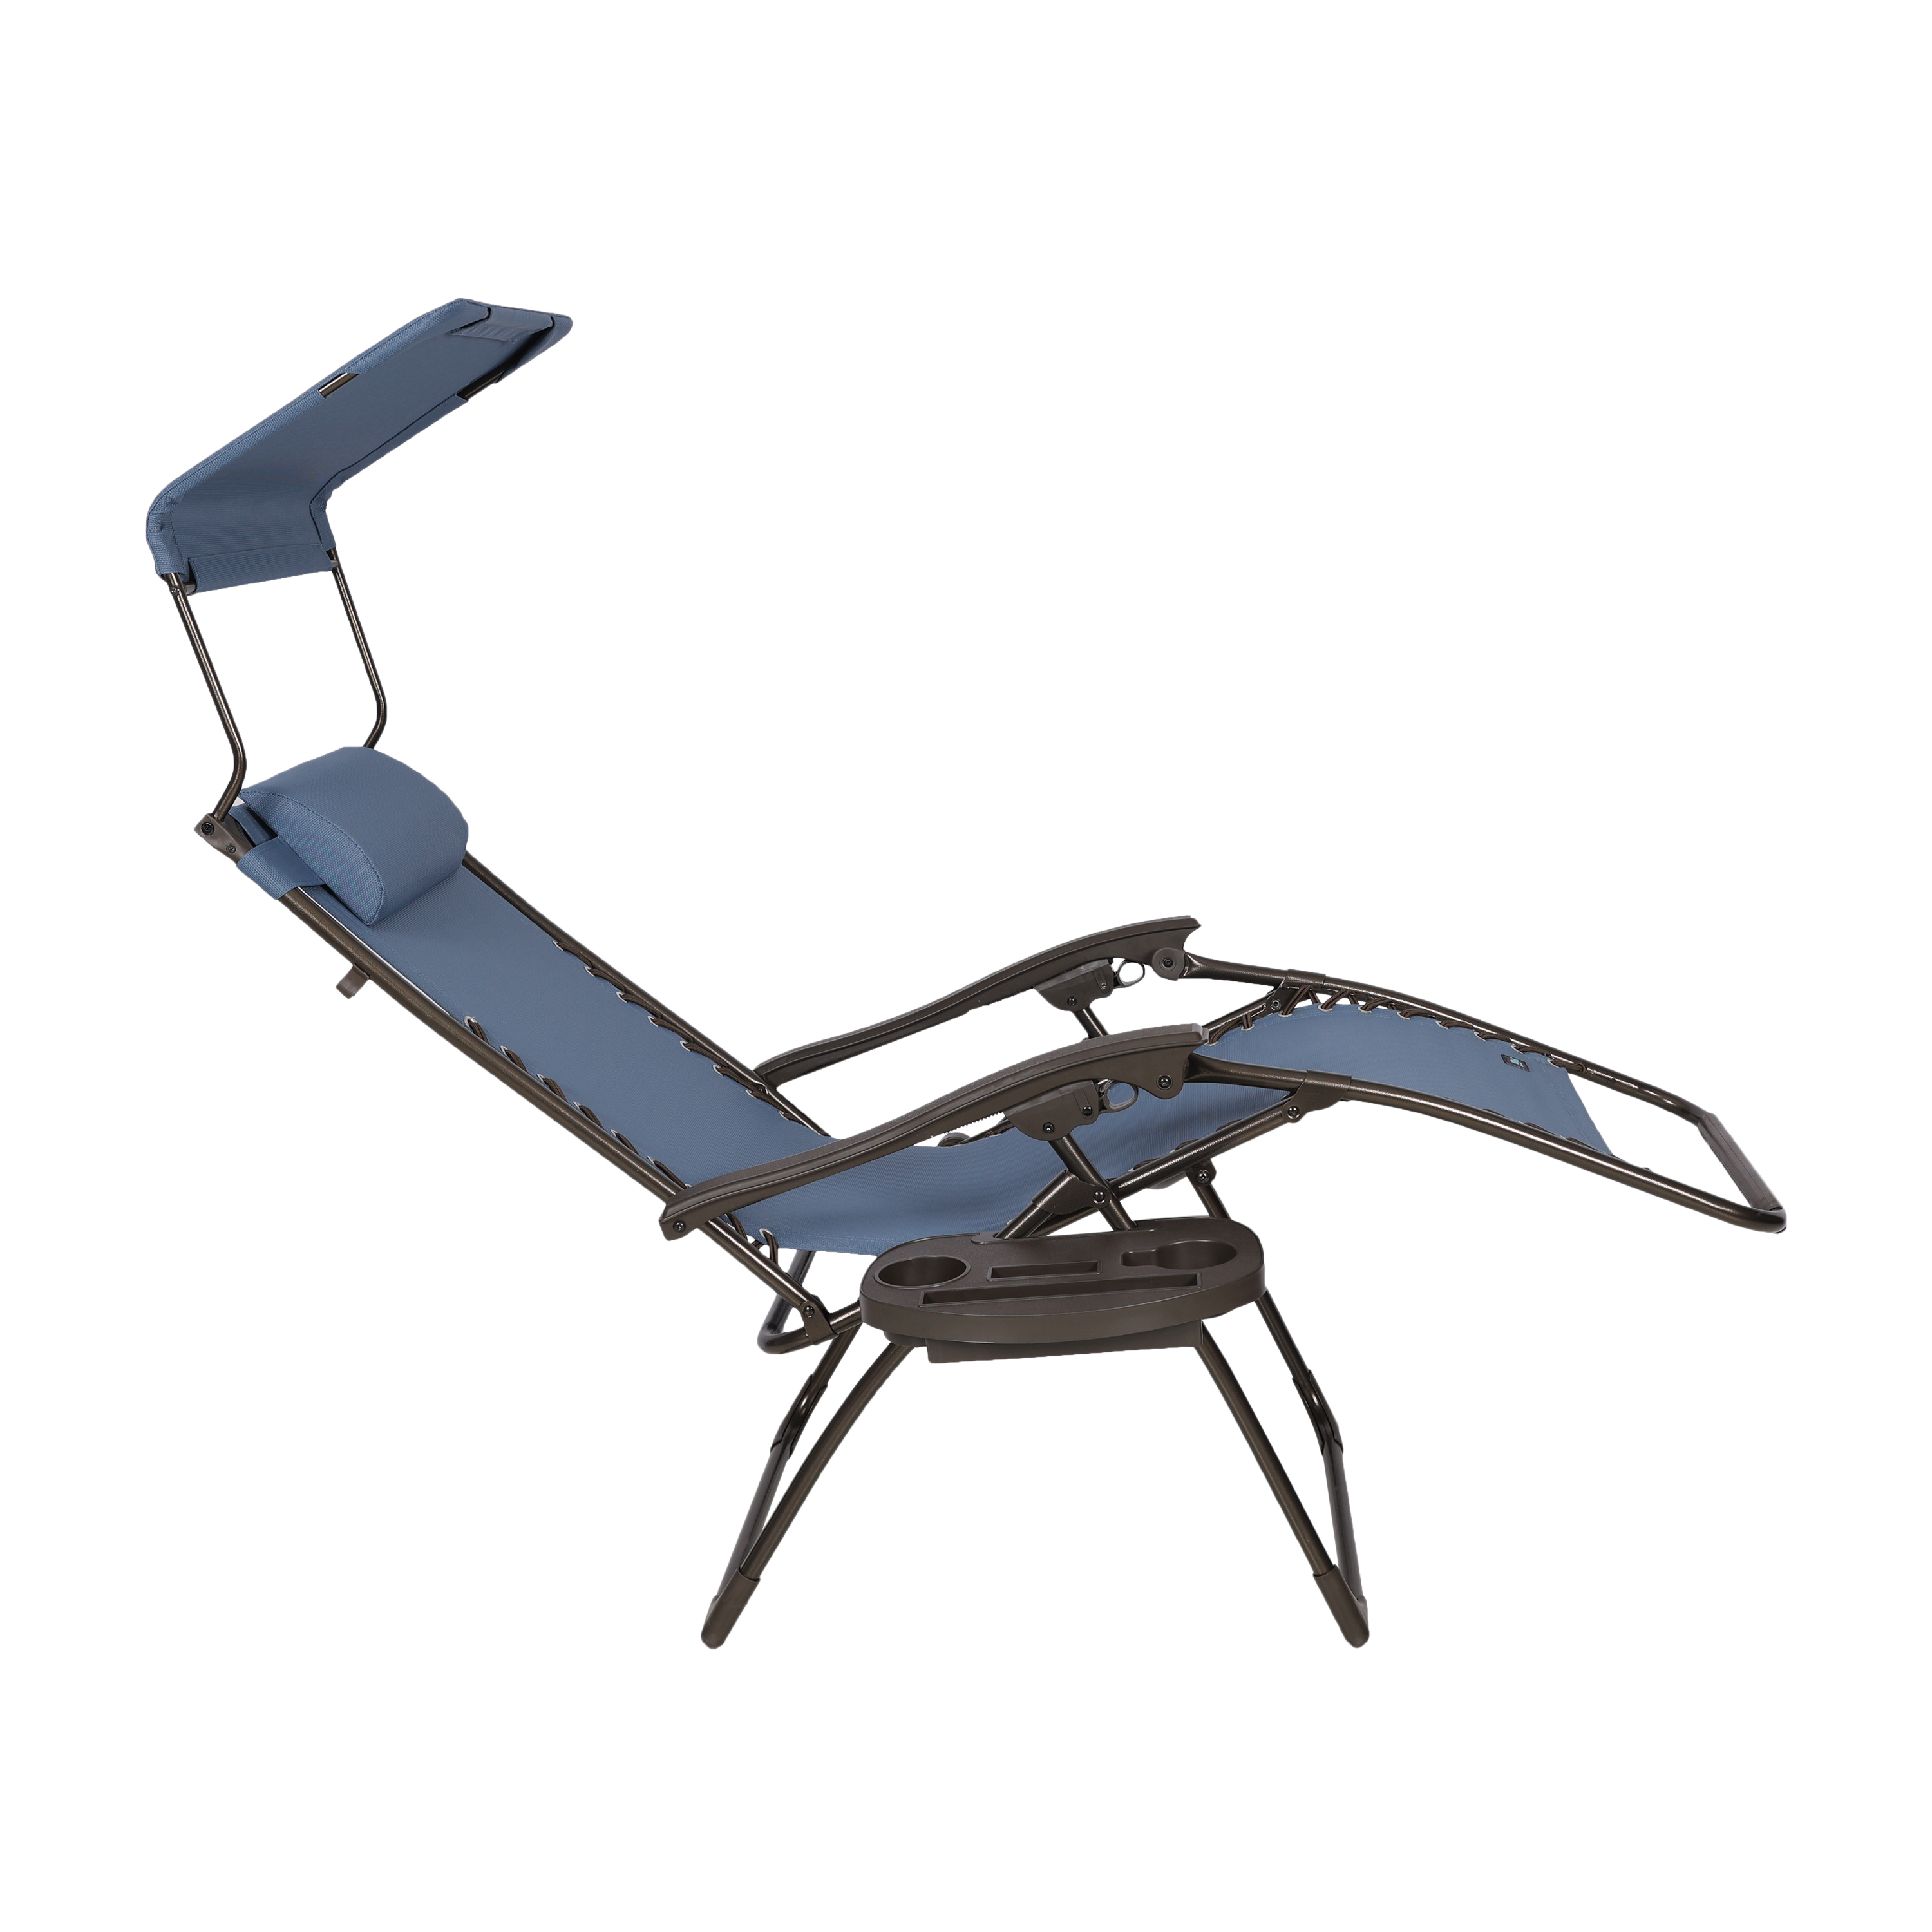 Bliss Hammocks 26" Wide Base Model Zero Gravity Chair w/ Canopy, Pillow, & Drink Tray Folding Outdoor Lawn, Deck, Patio Adjustable Lounge Chair, 300lbs. Weather and Rust Resistant, Denim Blue - image 3 of 4